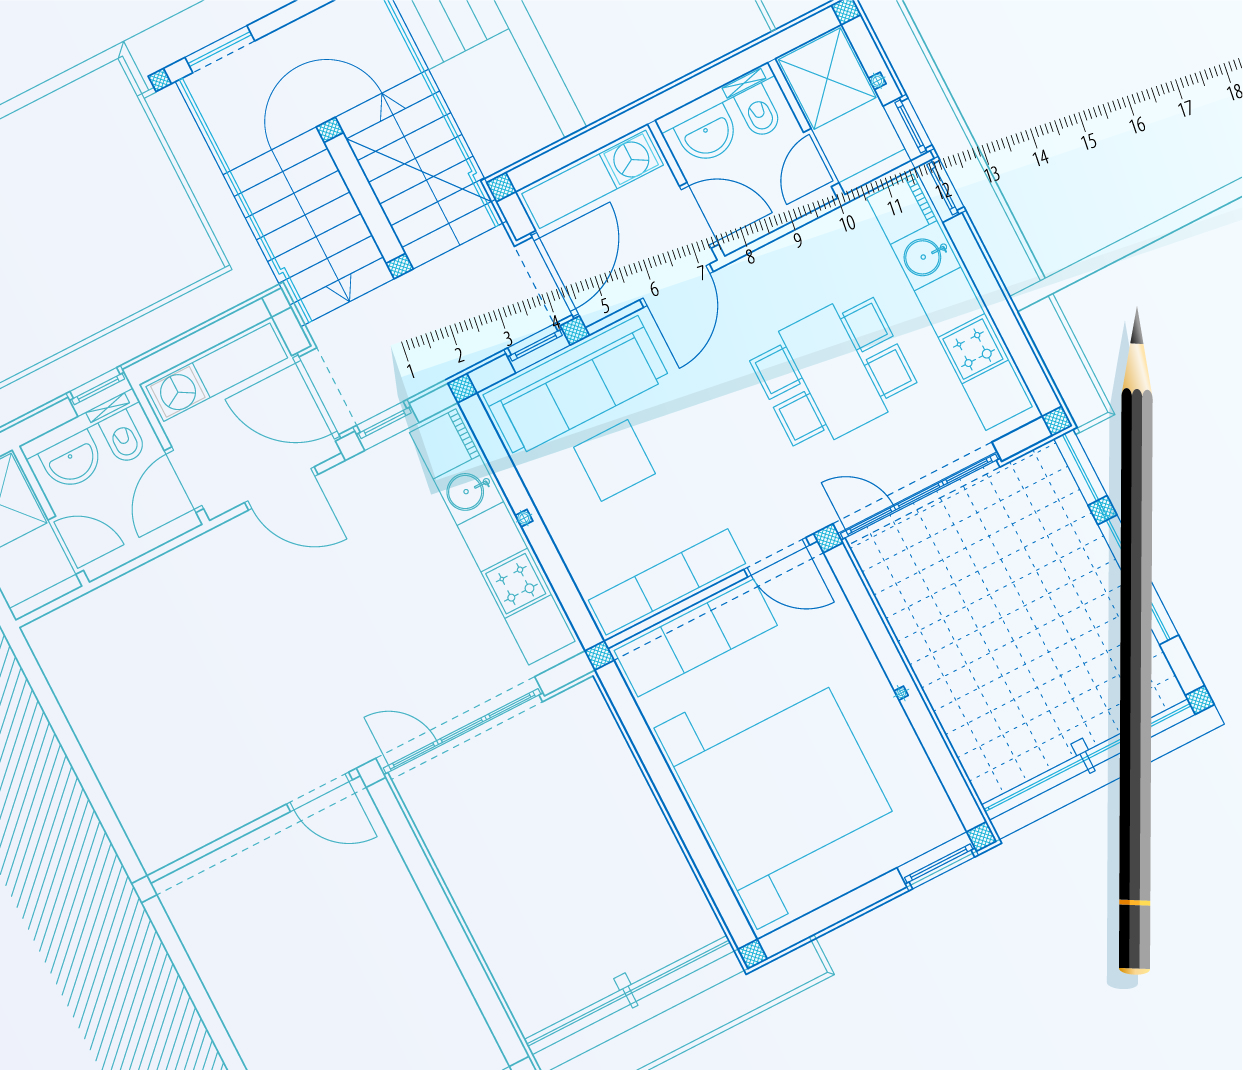 Free Vector Images of Floor Plans